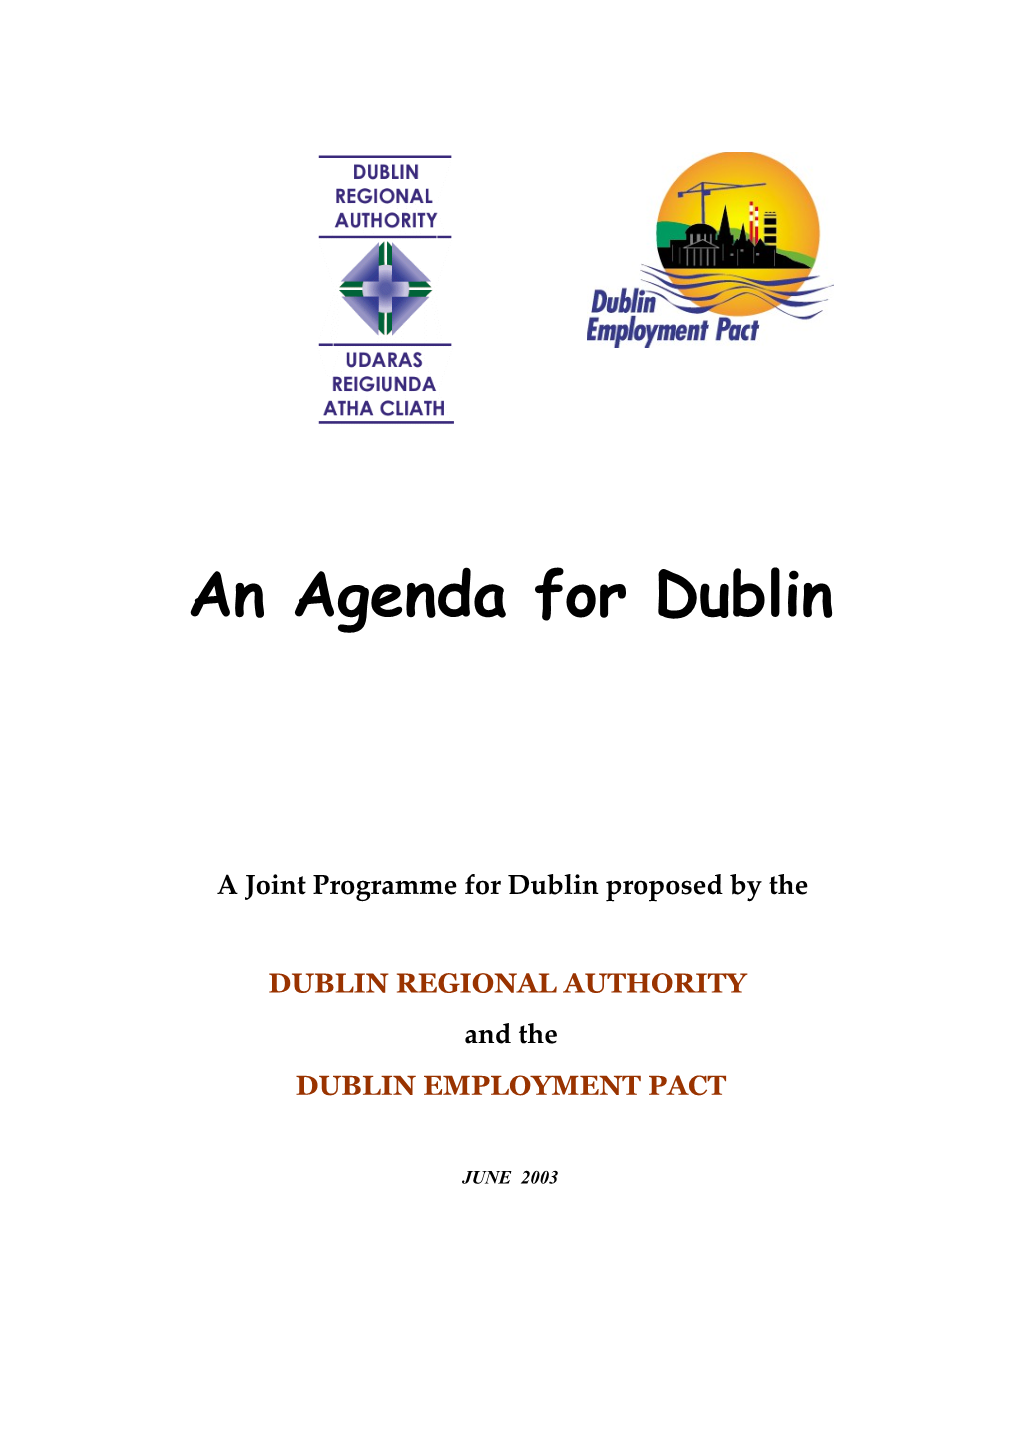 A Joint Programme for Dublin Proposed by The